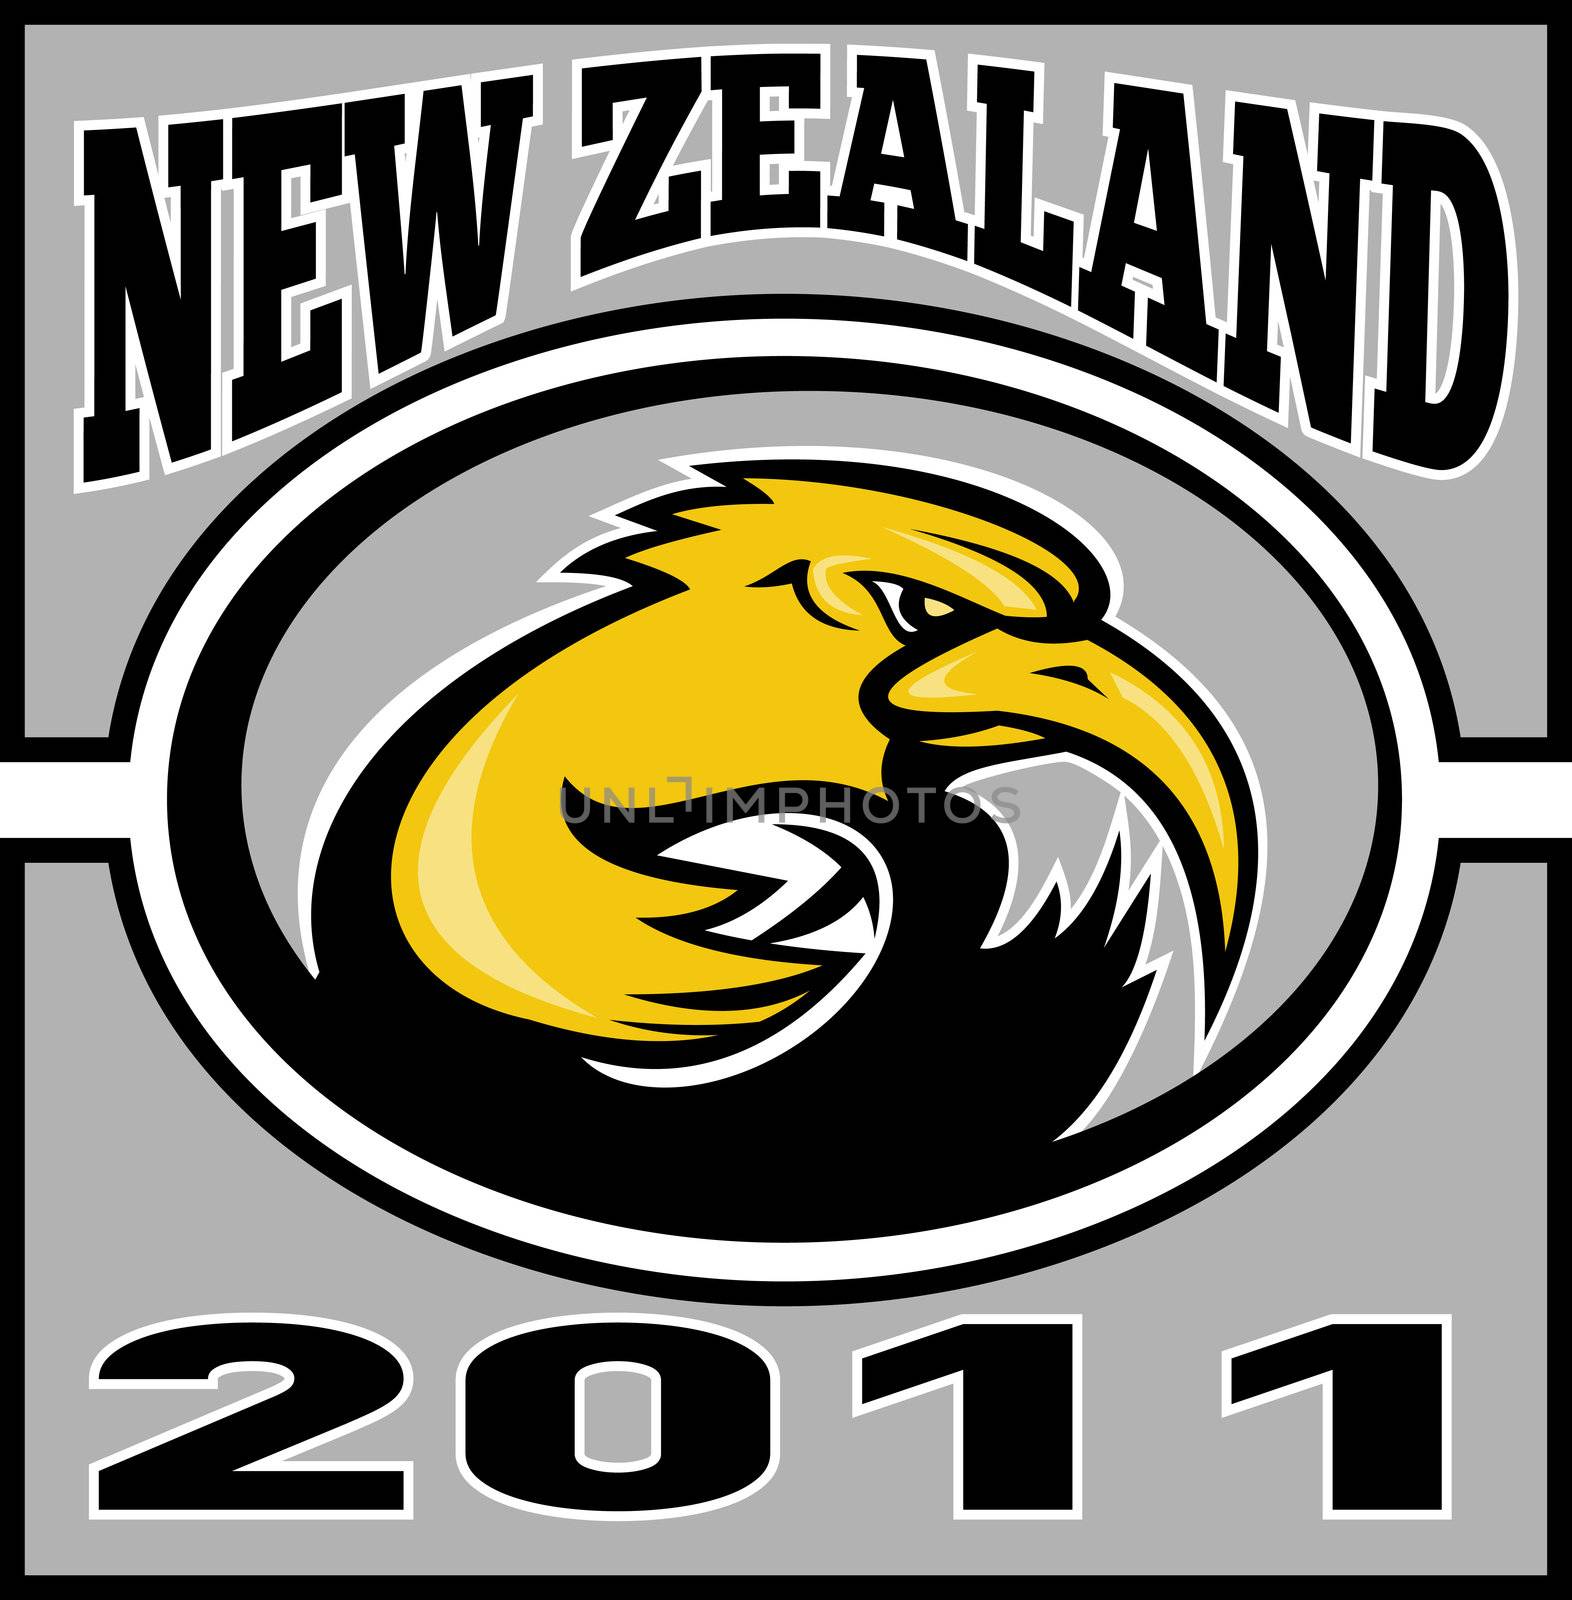  illustration of a kiwi rugby player running with ball with words new zealand 2011